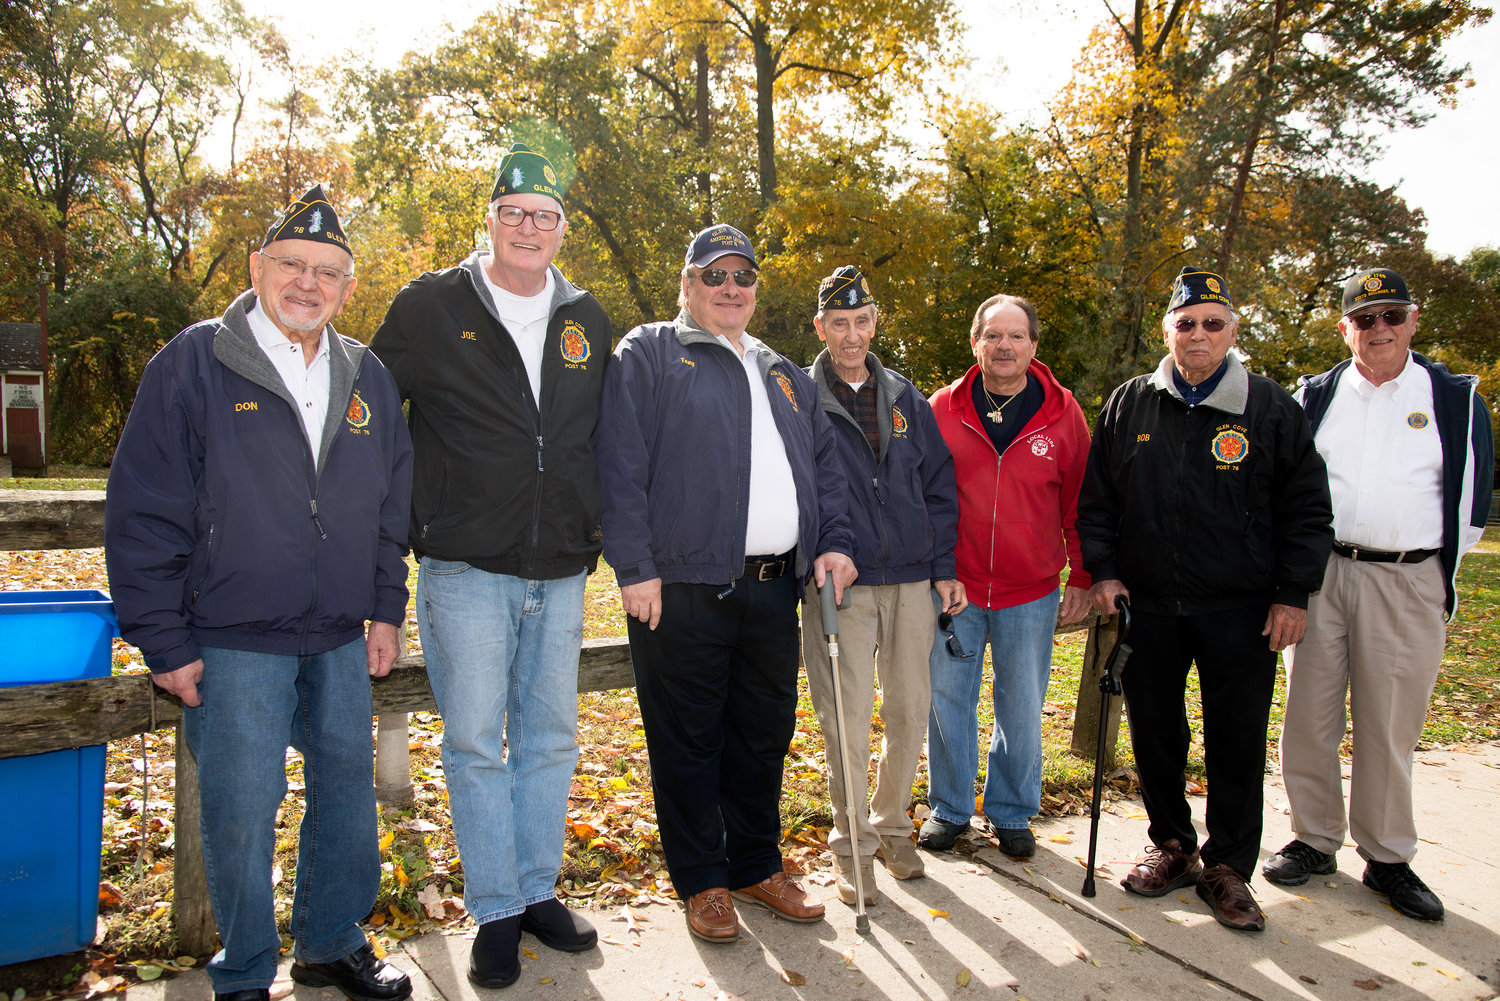 Members of the Glen Cove American Legion Post 76 attended the memorial service for Richard Doster, who served in the Korean War.